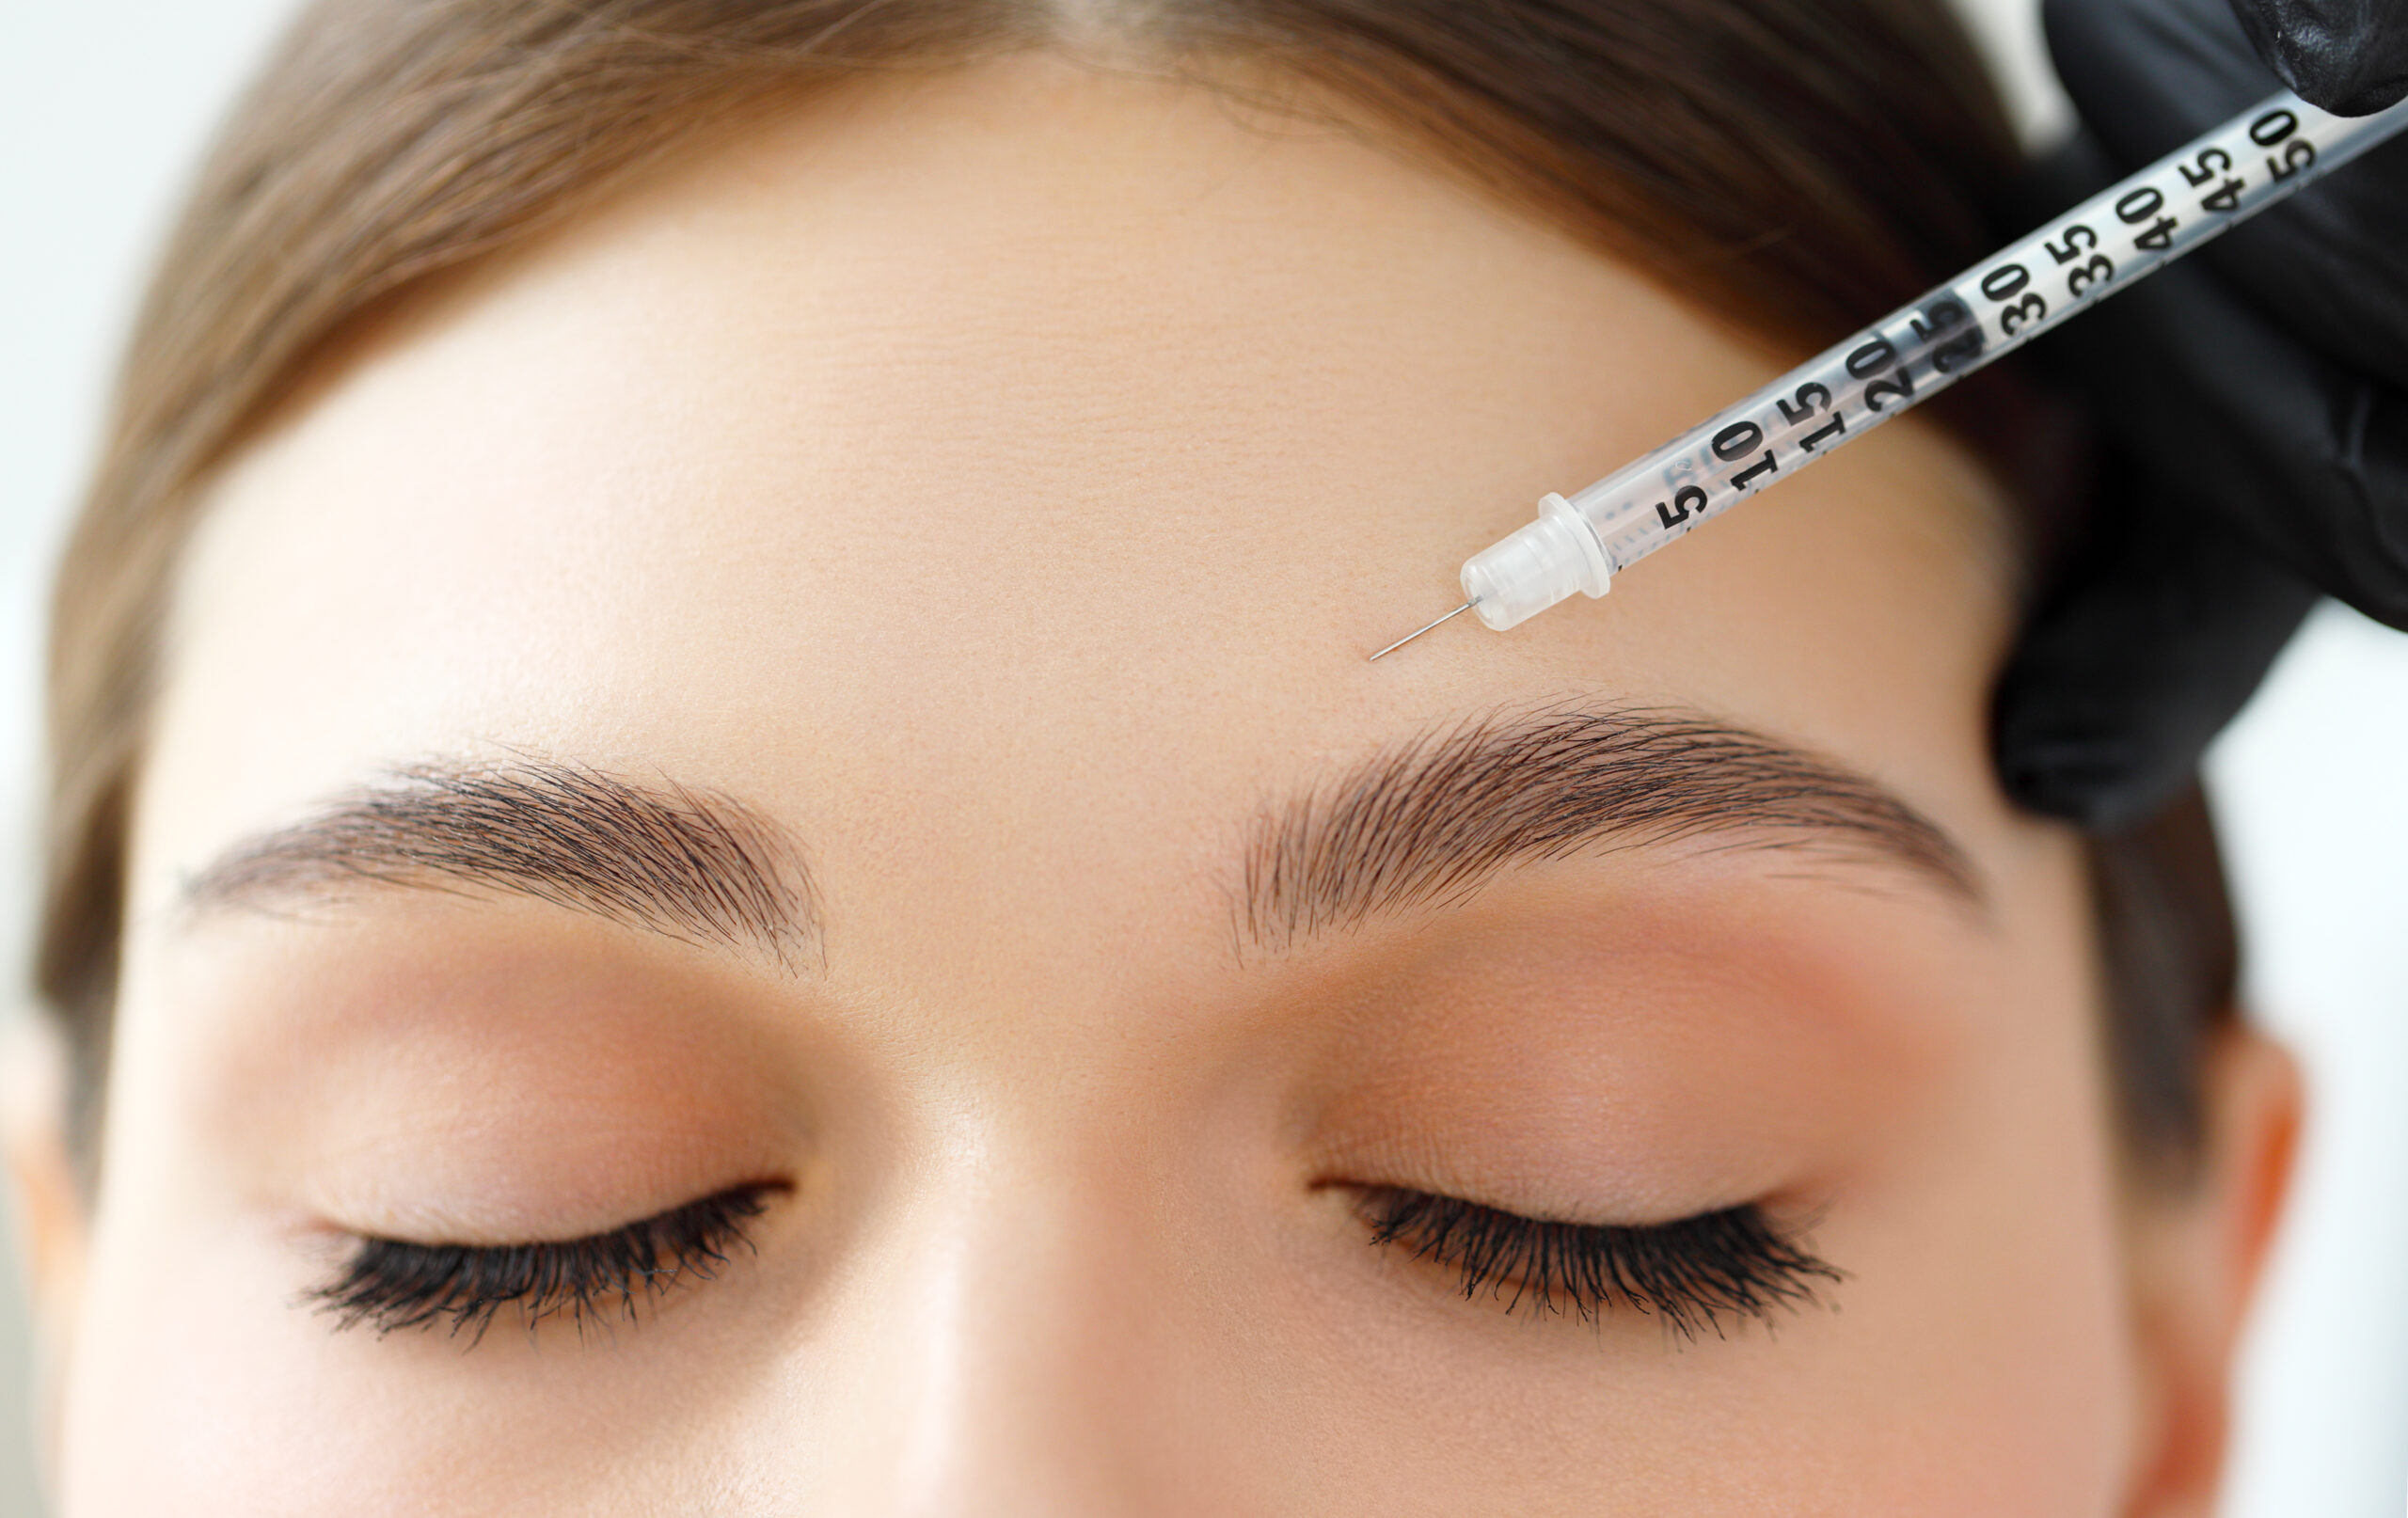 woman receiving Botox about her brow for forehead lines